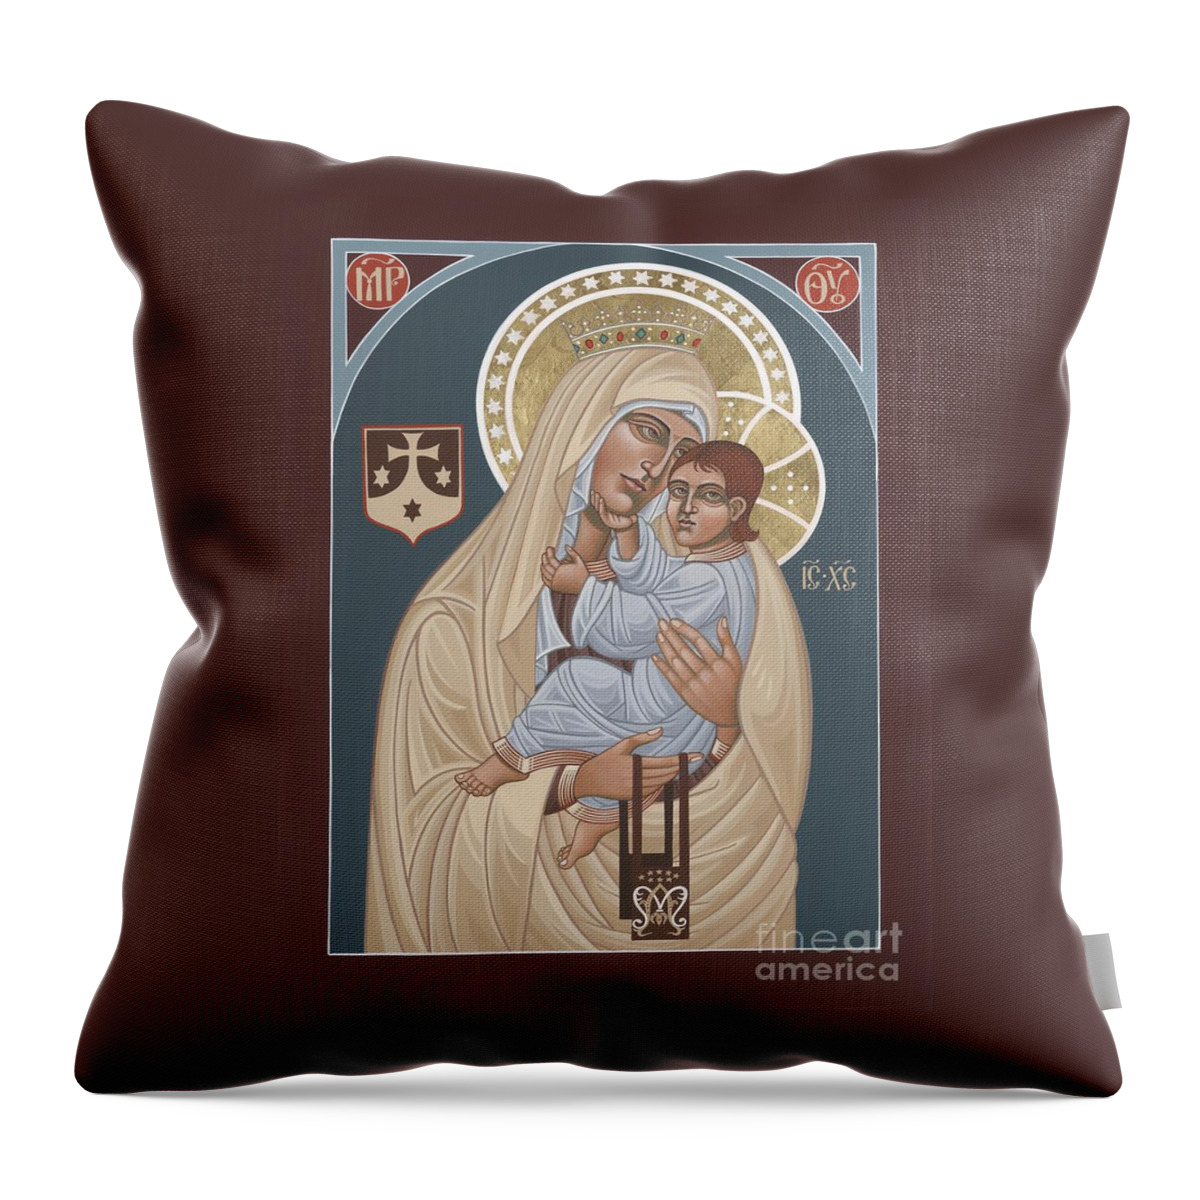 Our Lady Of Mt. Carmel Was Commissioned By The Church Of Mt. Carmel In Brooklyn Throw Pillow featuring the painting Our Lady of Mt. Carmel 255 by William Hart McNichols